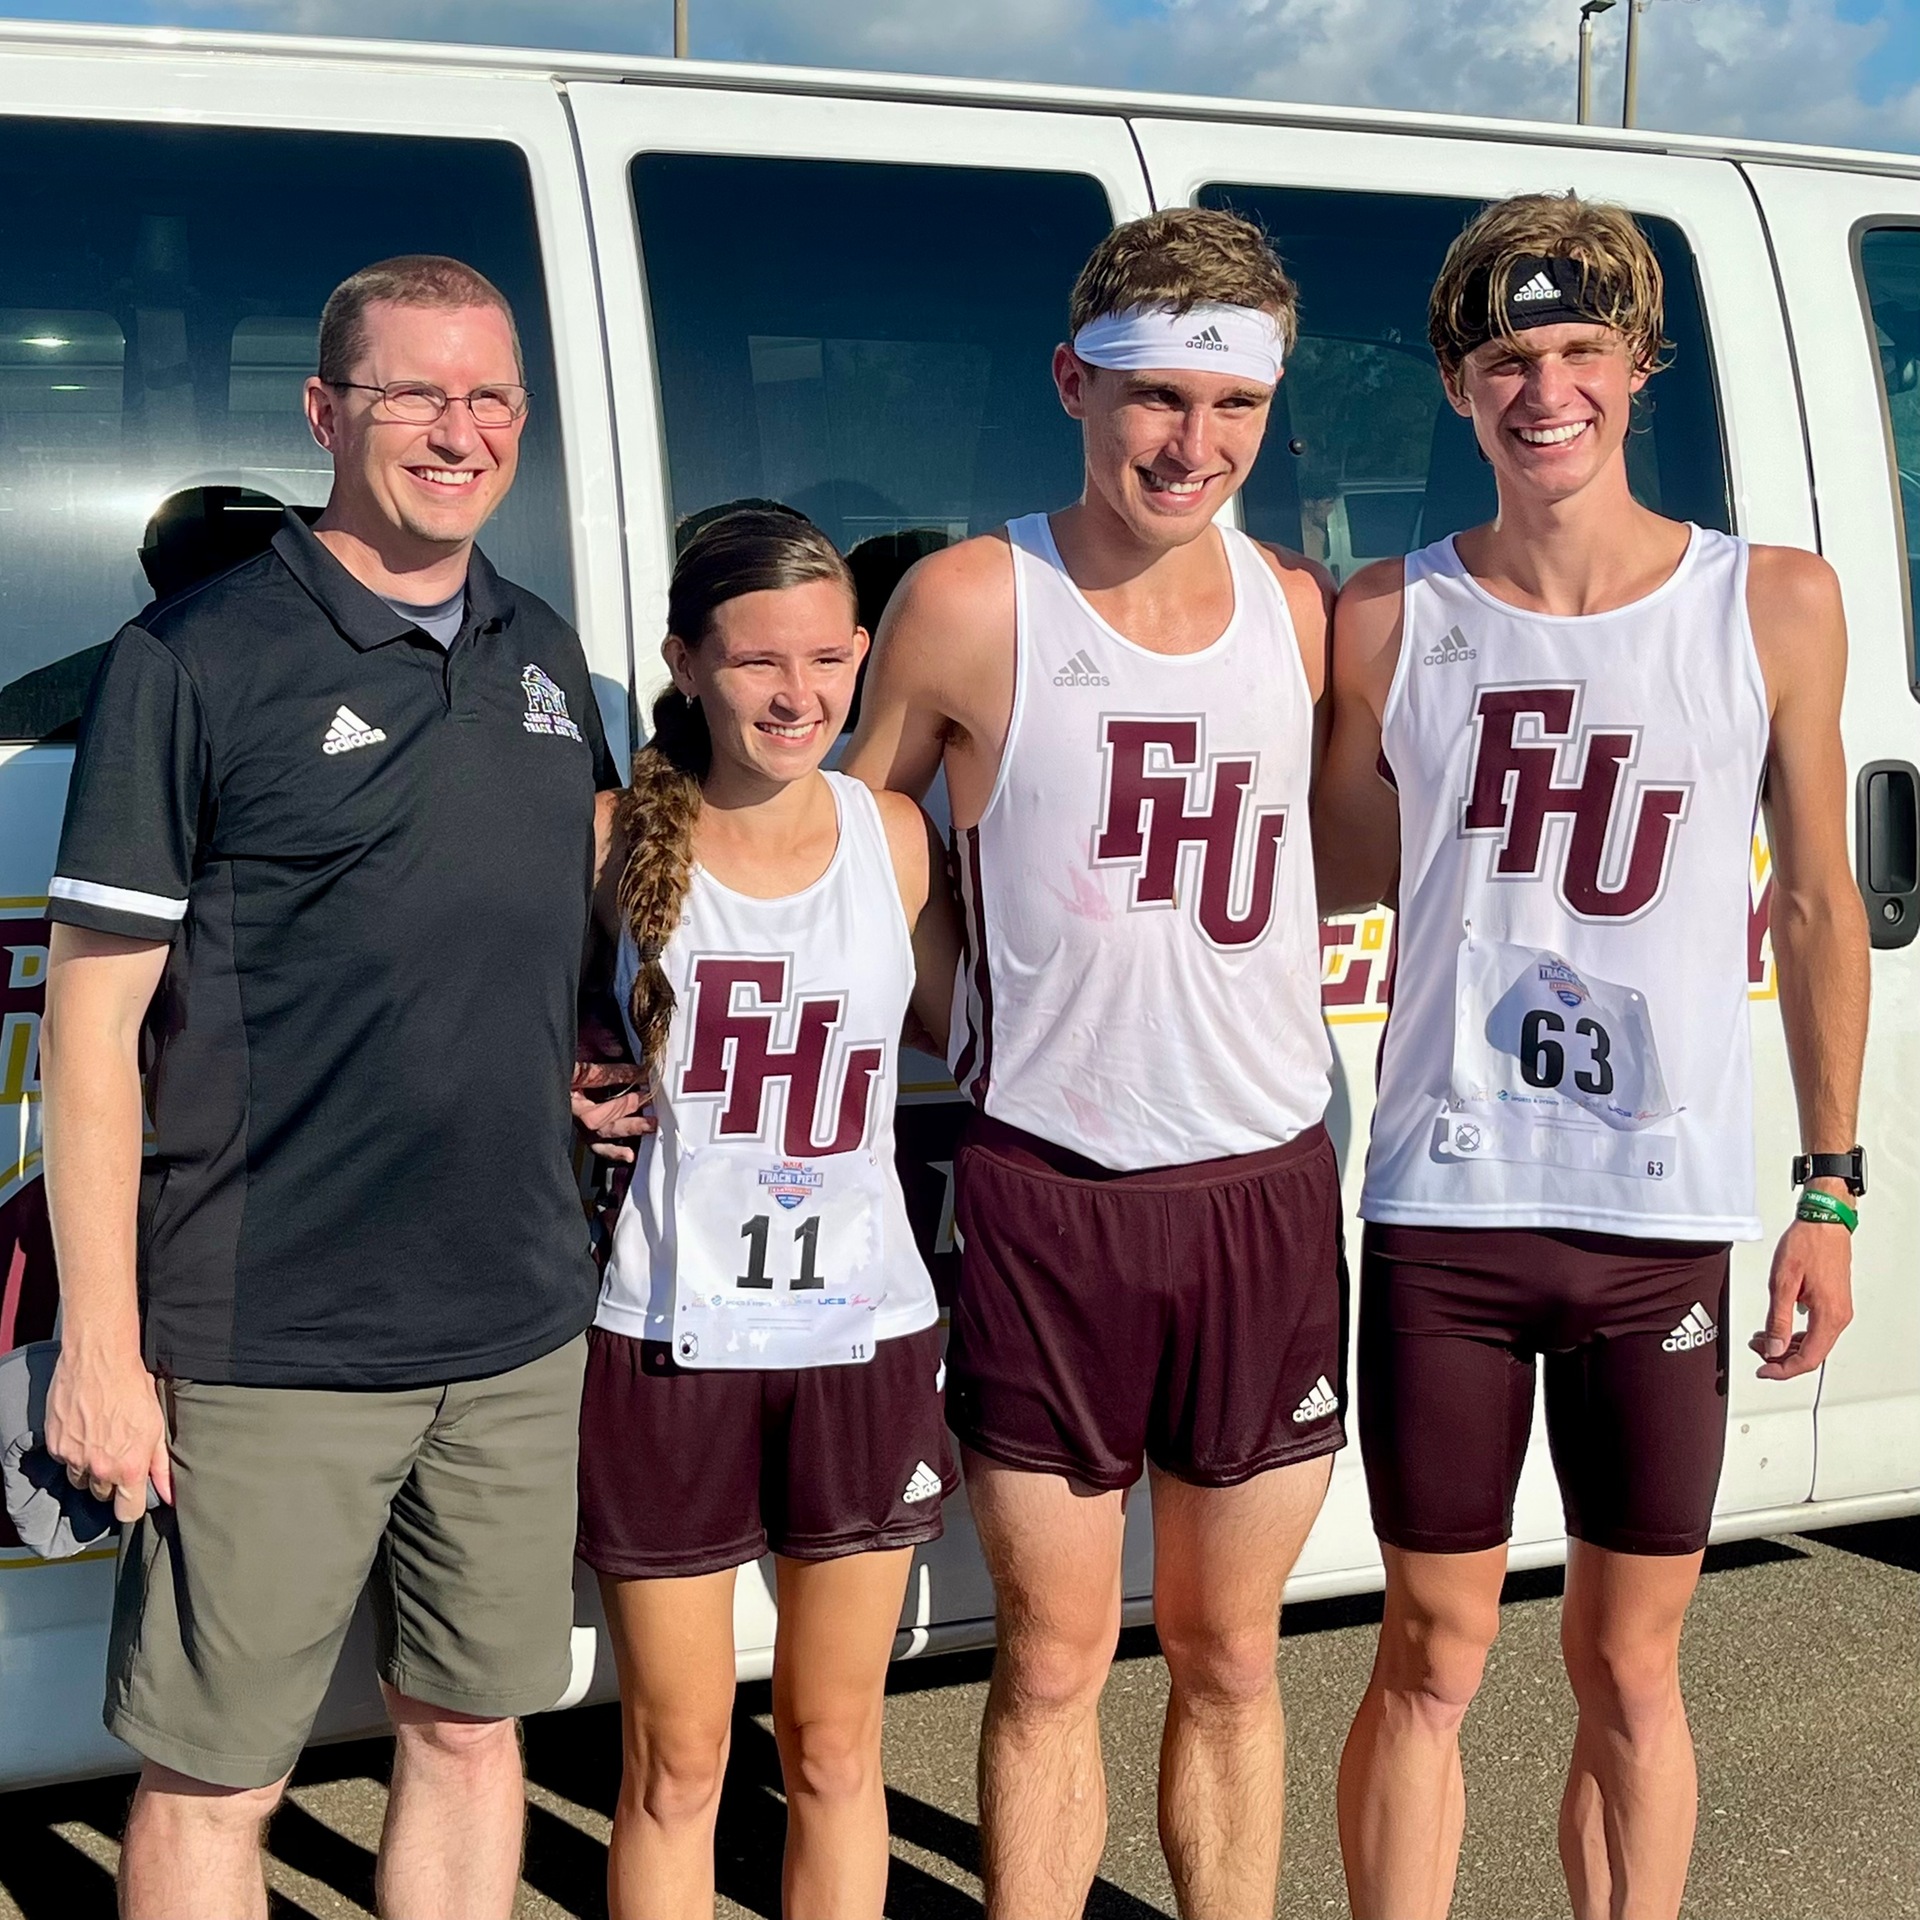 FHU T&F sees record year come to conclusion in Alabama